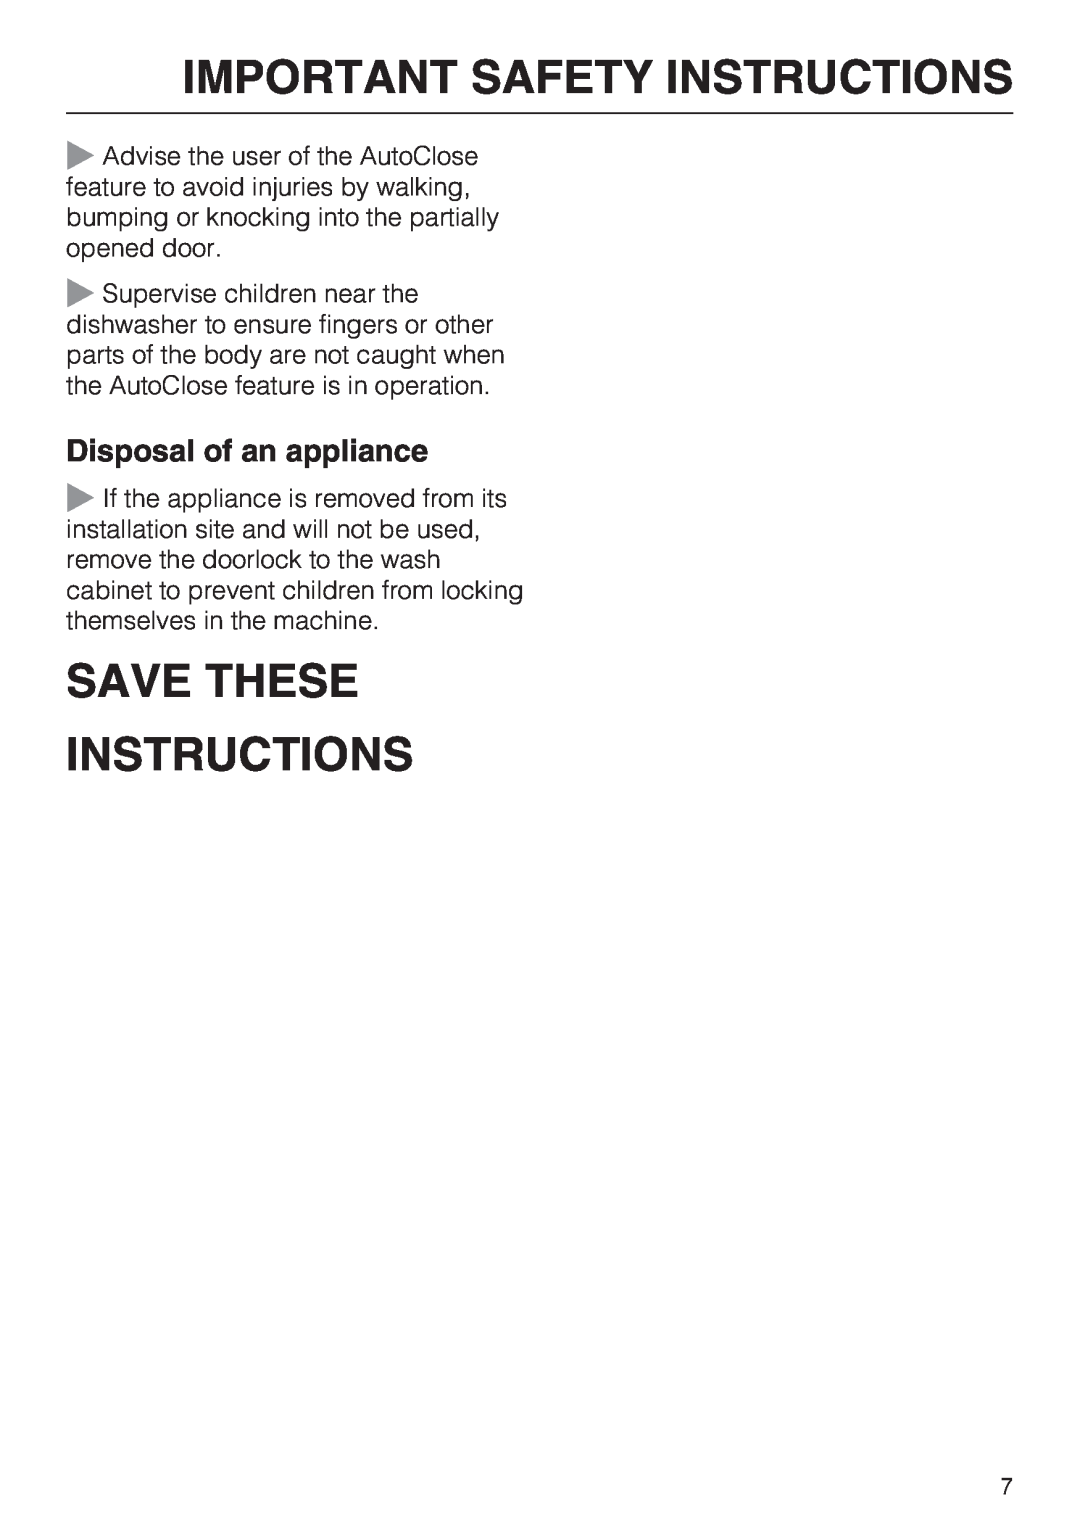 Miele G 2832 manual Save These Instructions, Disposal of an appliance, Important Safety Instructions 